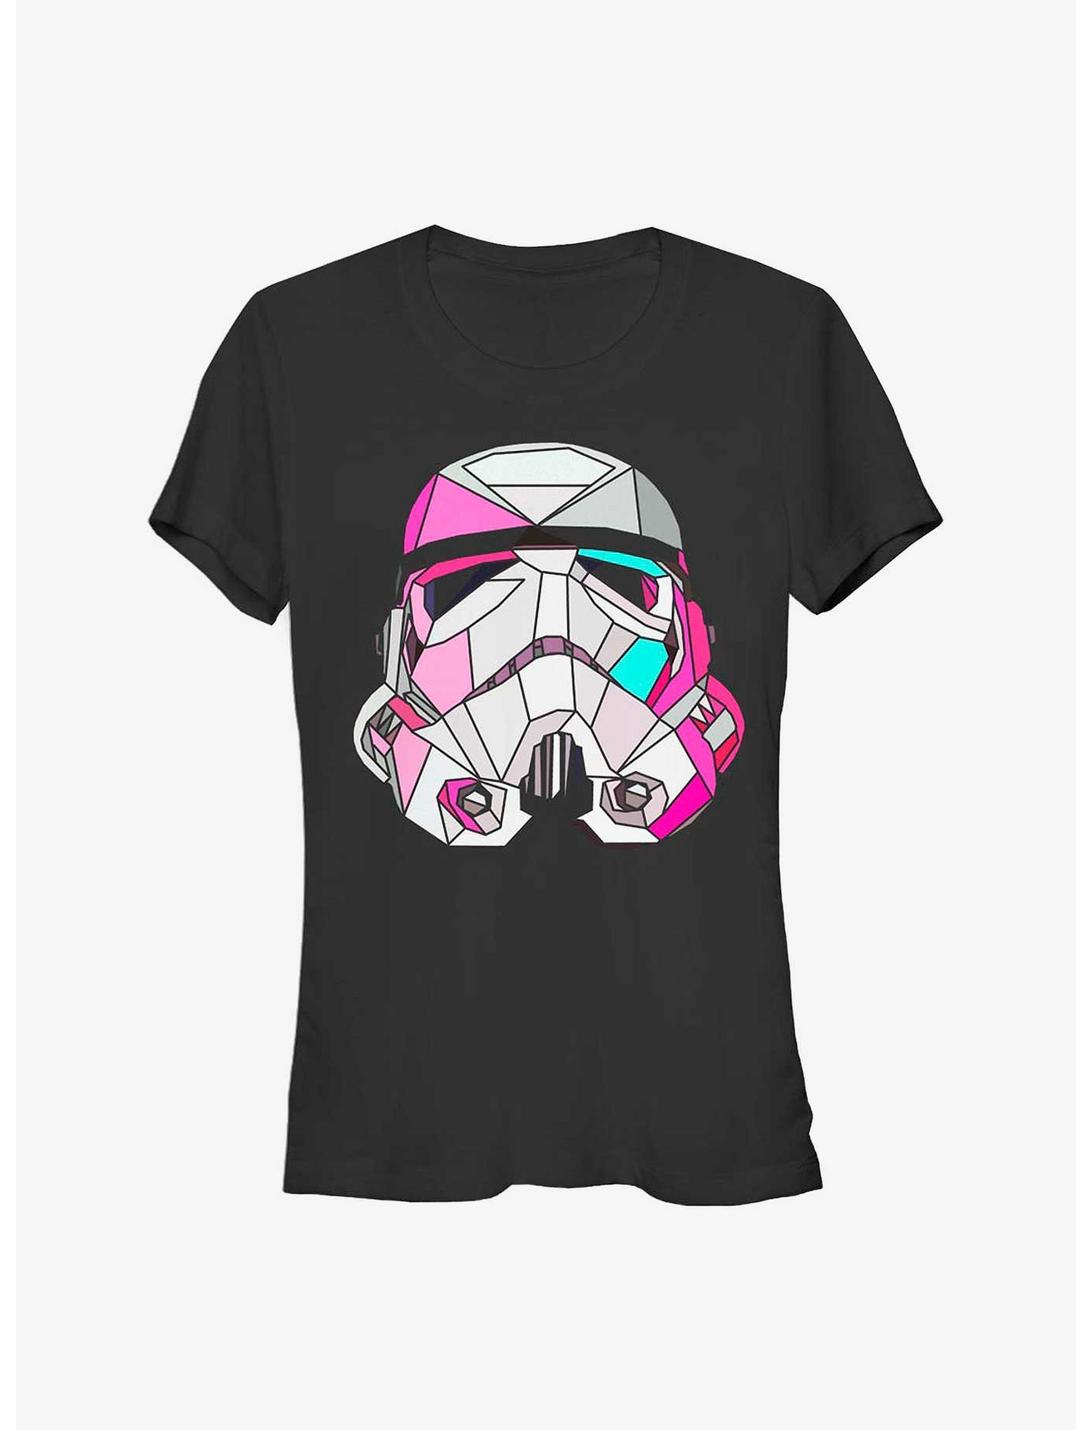 Star Wars Stained Trooper Girls T-Shirt, BLACK, hi-res